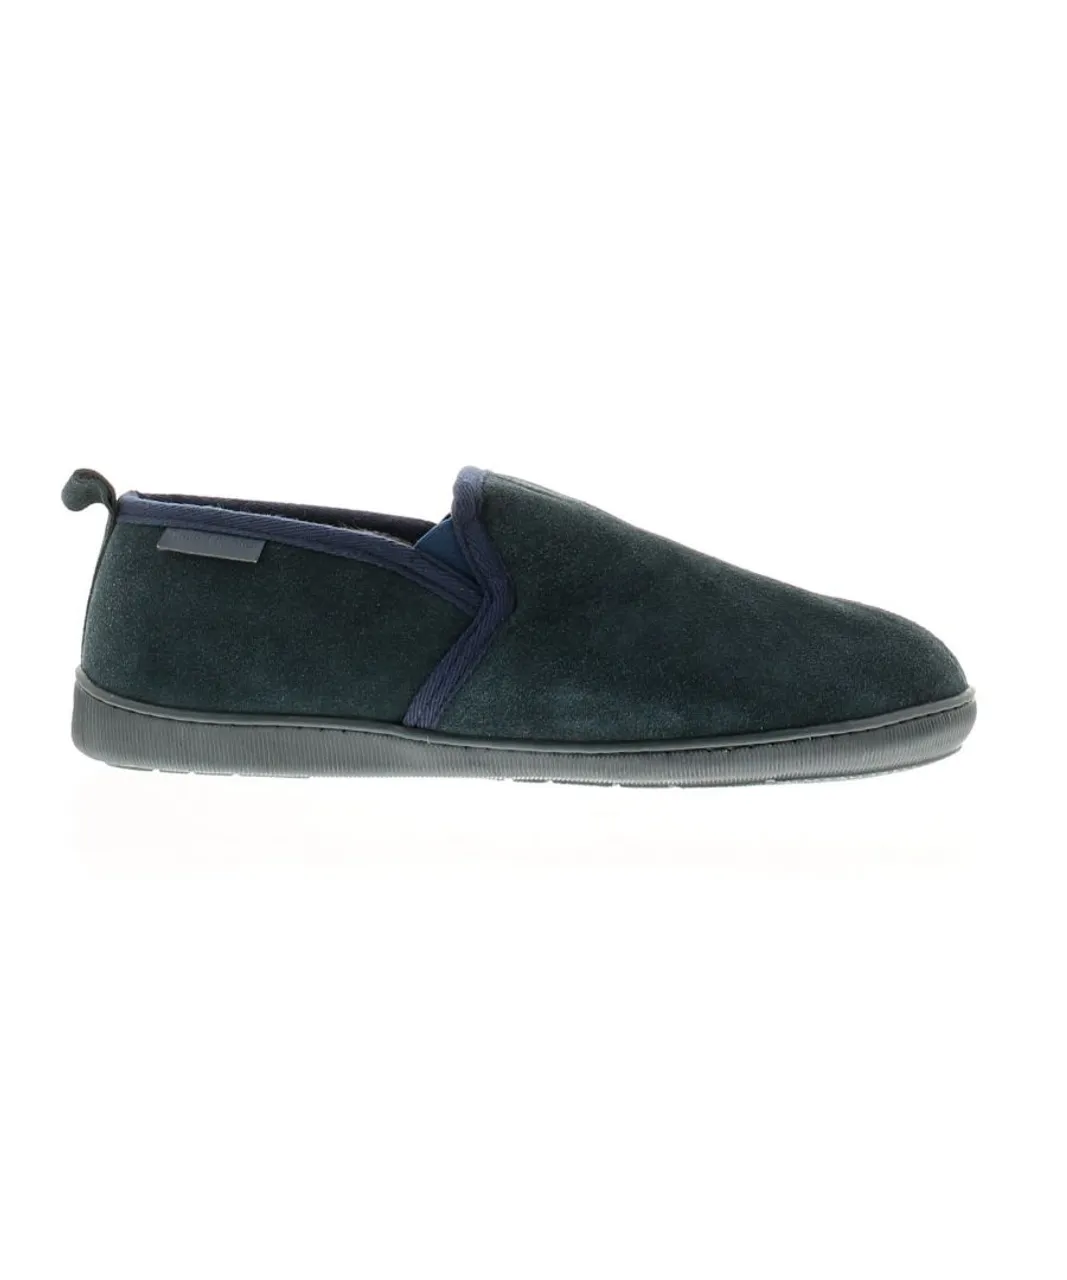 Hush Puppies arnold leather mens full slippers navy